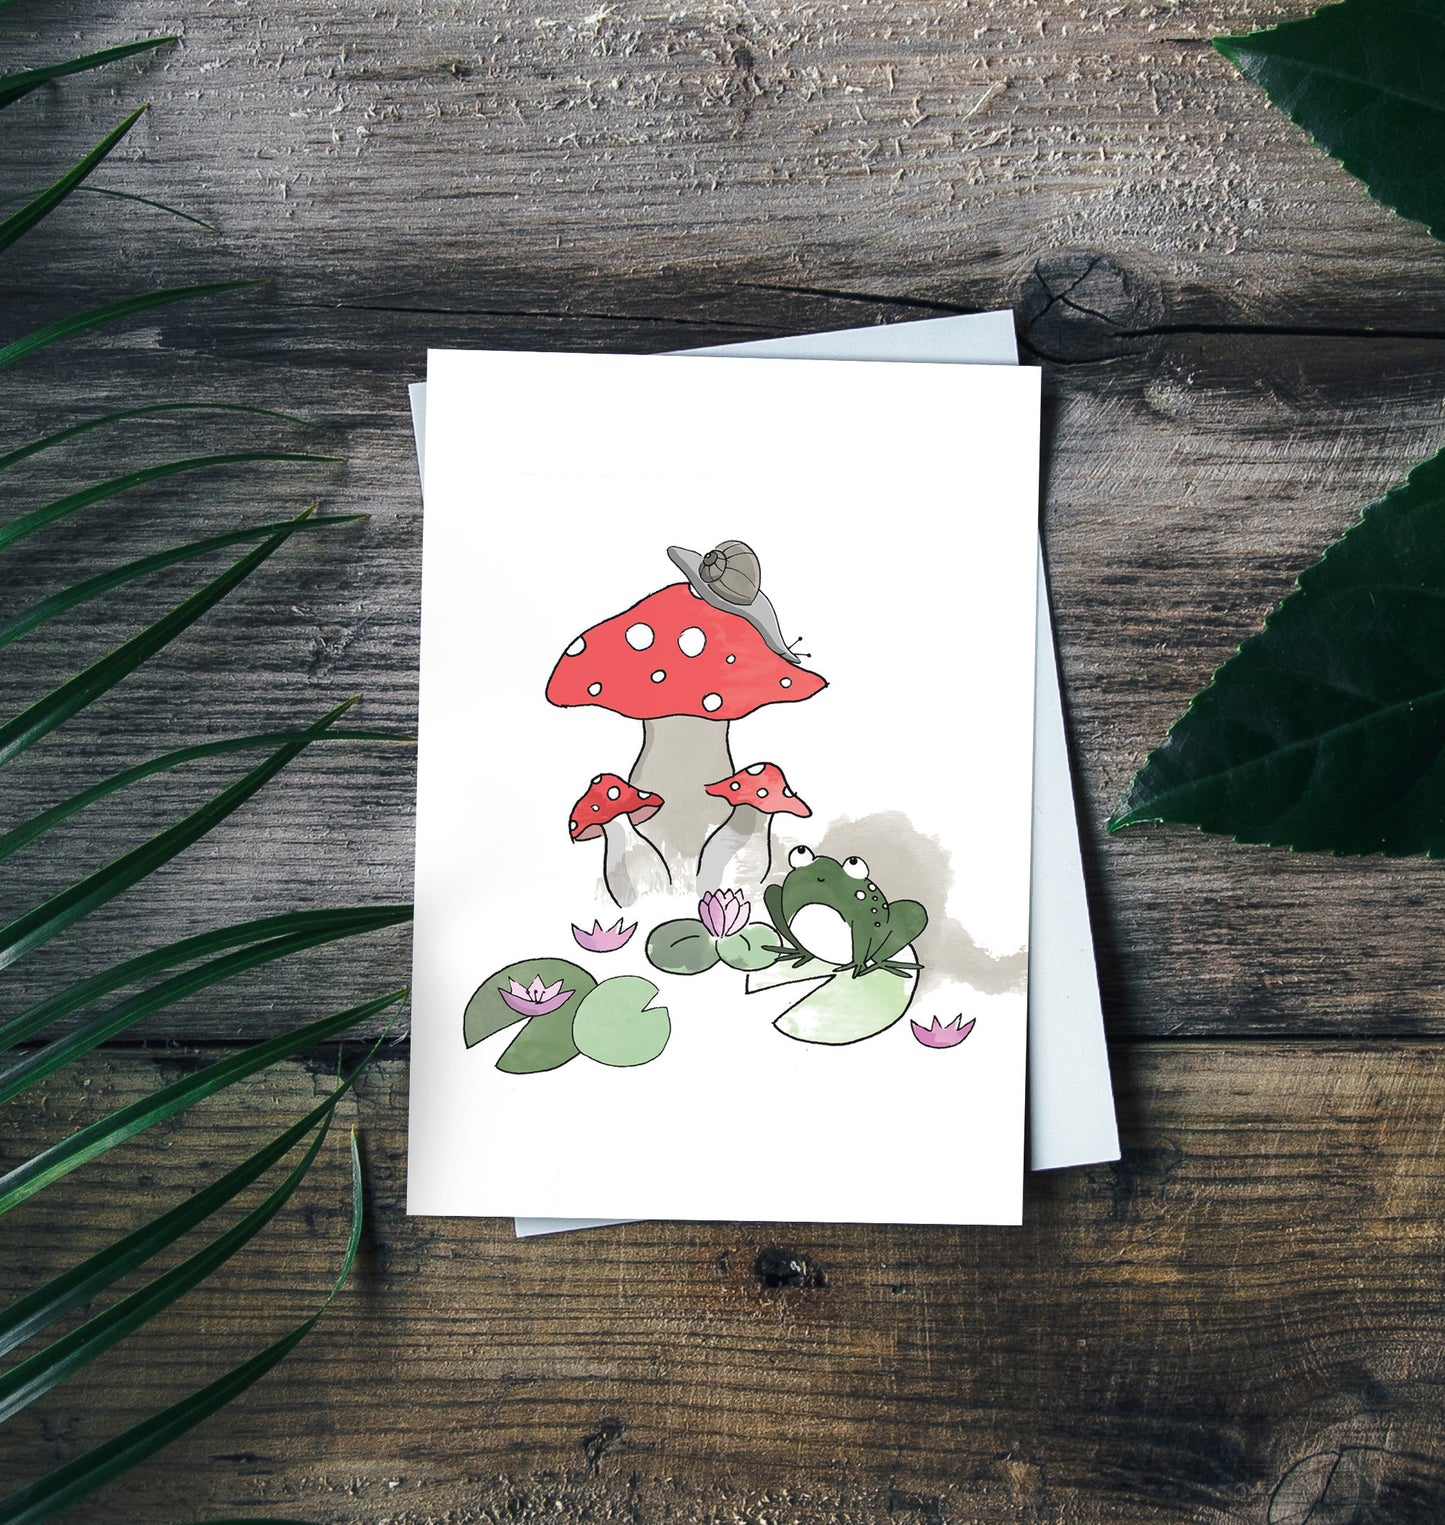 Frog Card, Mushroom Card, Cottage Core Gift, Cute Note Cards, Thinking of You Card, Miss You Card, Plant Greeting Card, Thinking of You Gift